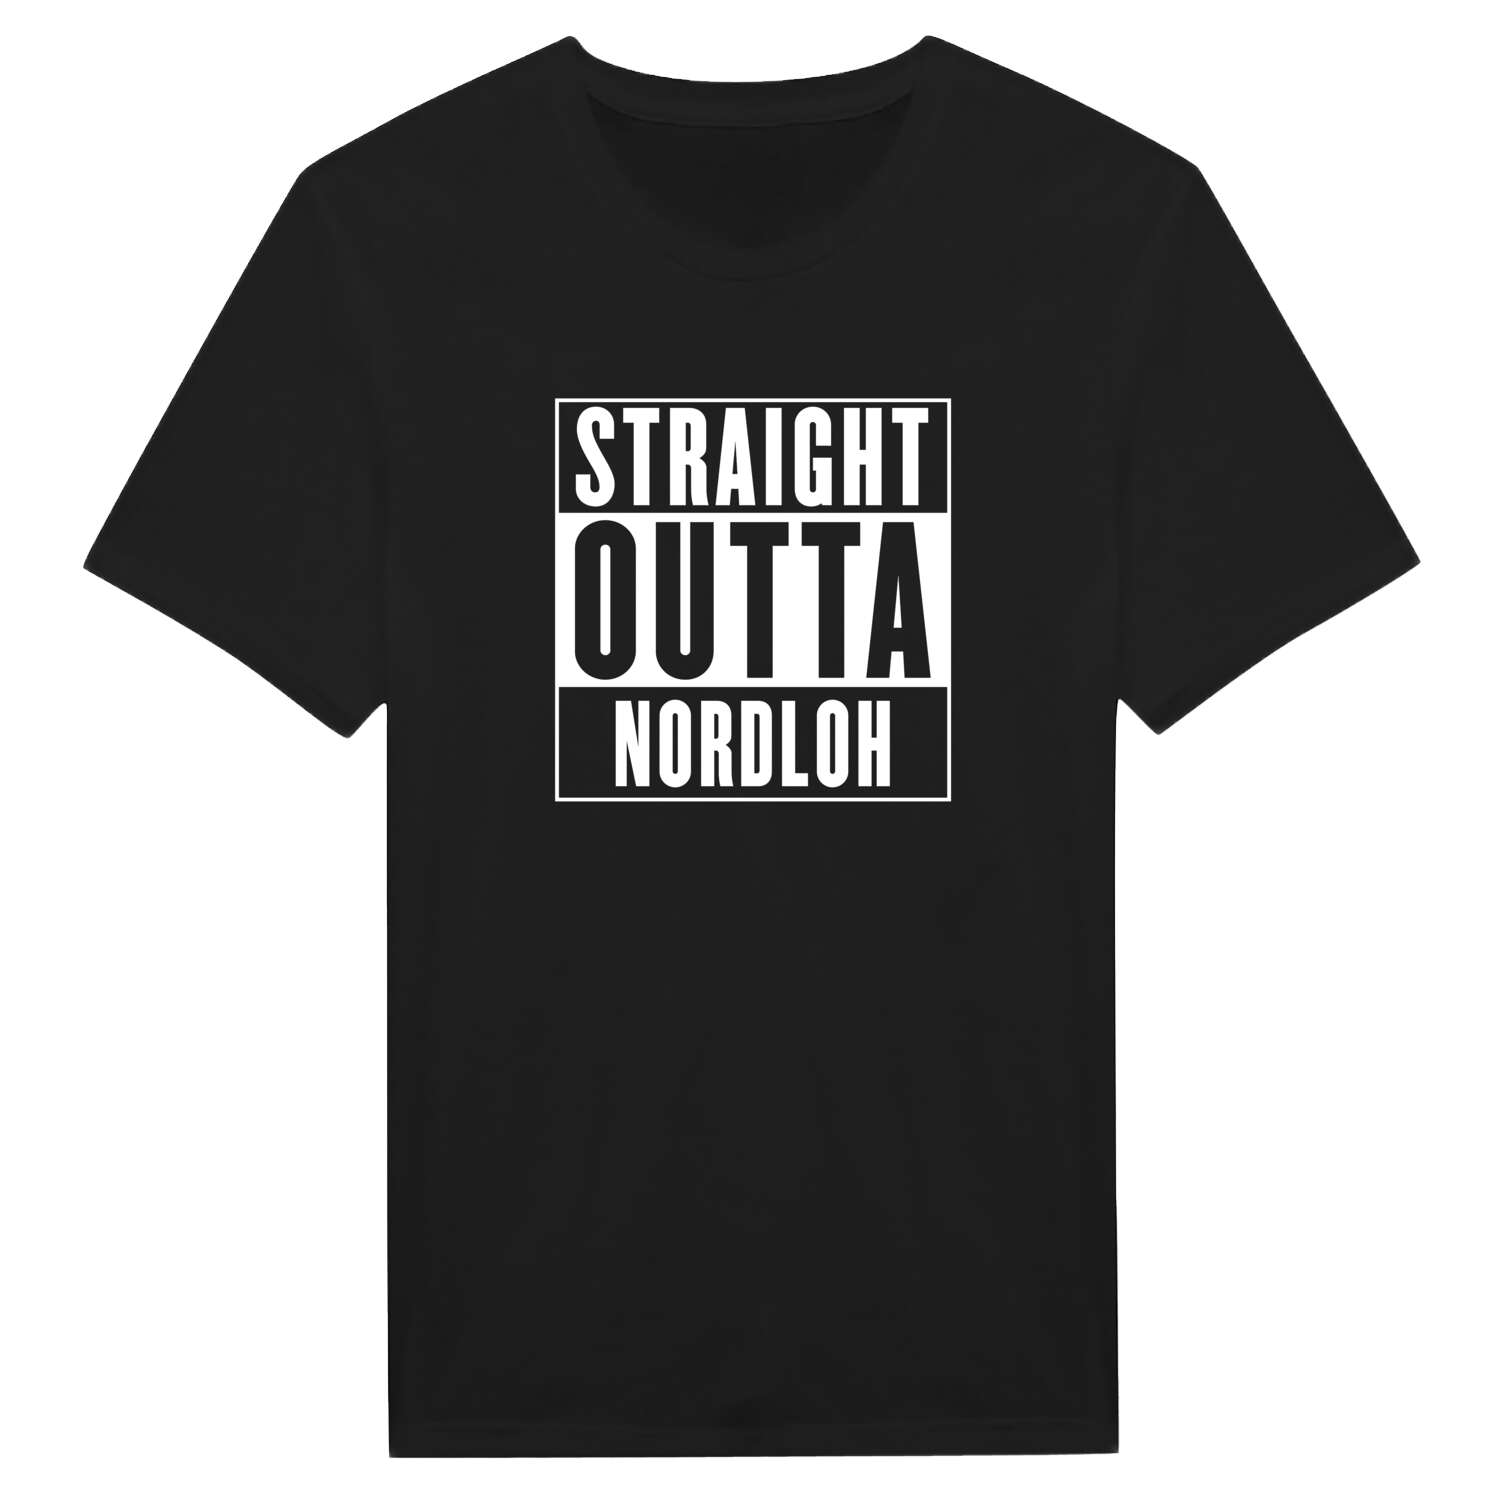 Nordloh T-Shirt »Straight Outta«